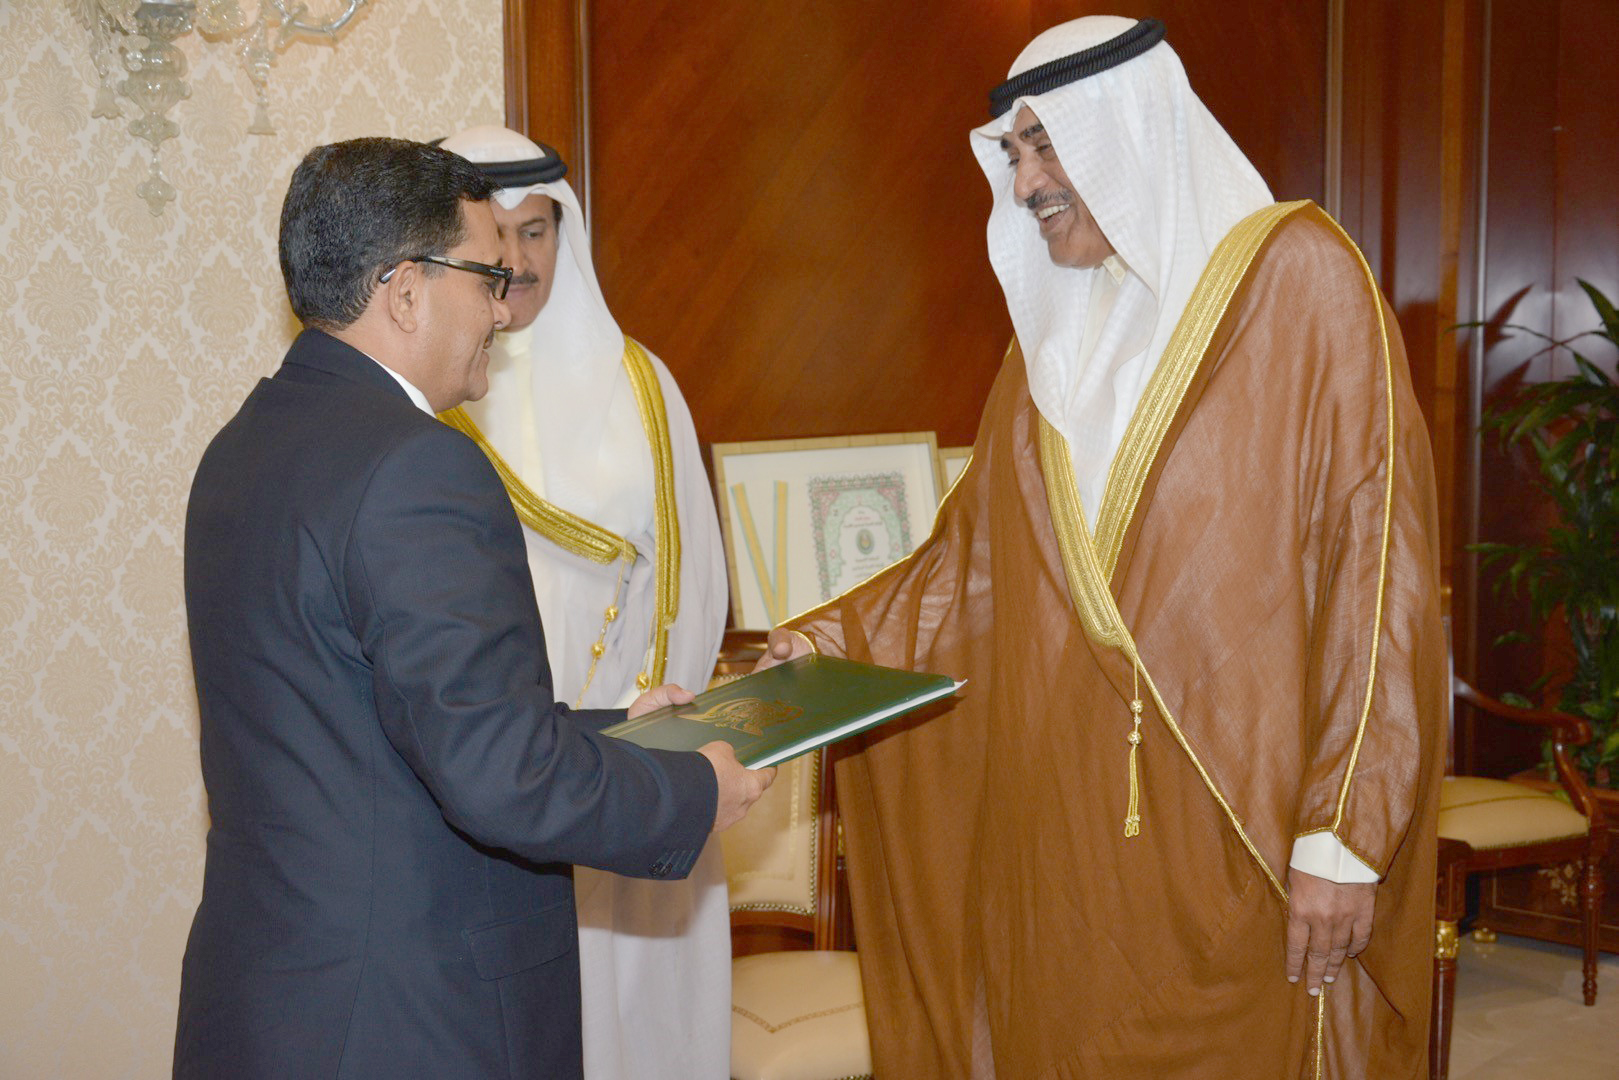 First Deputy Prime Minister and Foreign Minister Sheikh Sabah Al-Khaled Al-Hamad Al-Sabah receives credentials of the newly-assigned Yemeni Ambassador to the State of Kuwait, Ali Mansour Bin Sefaa